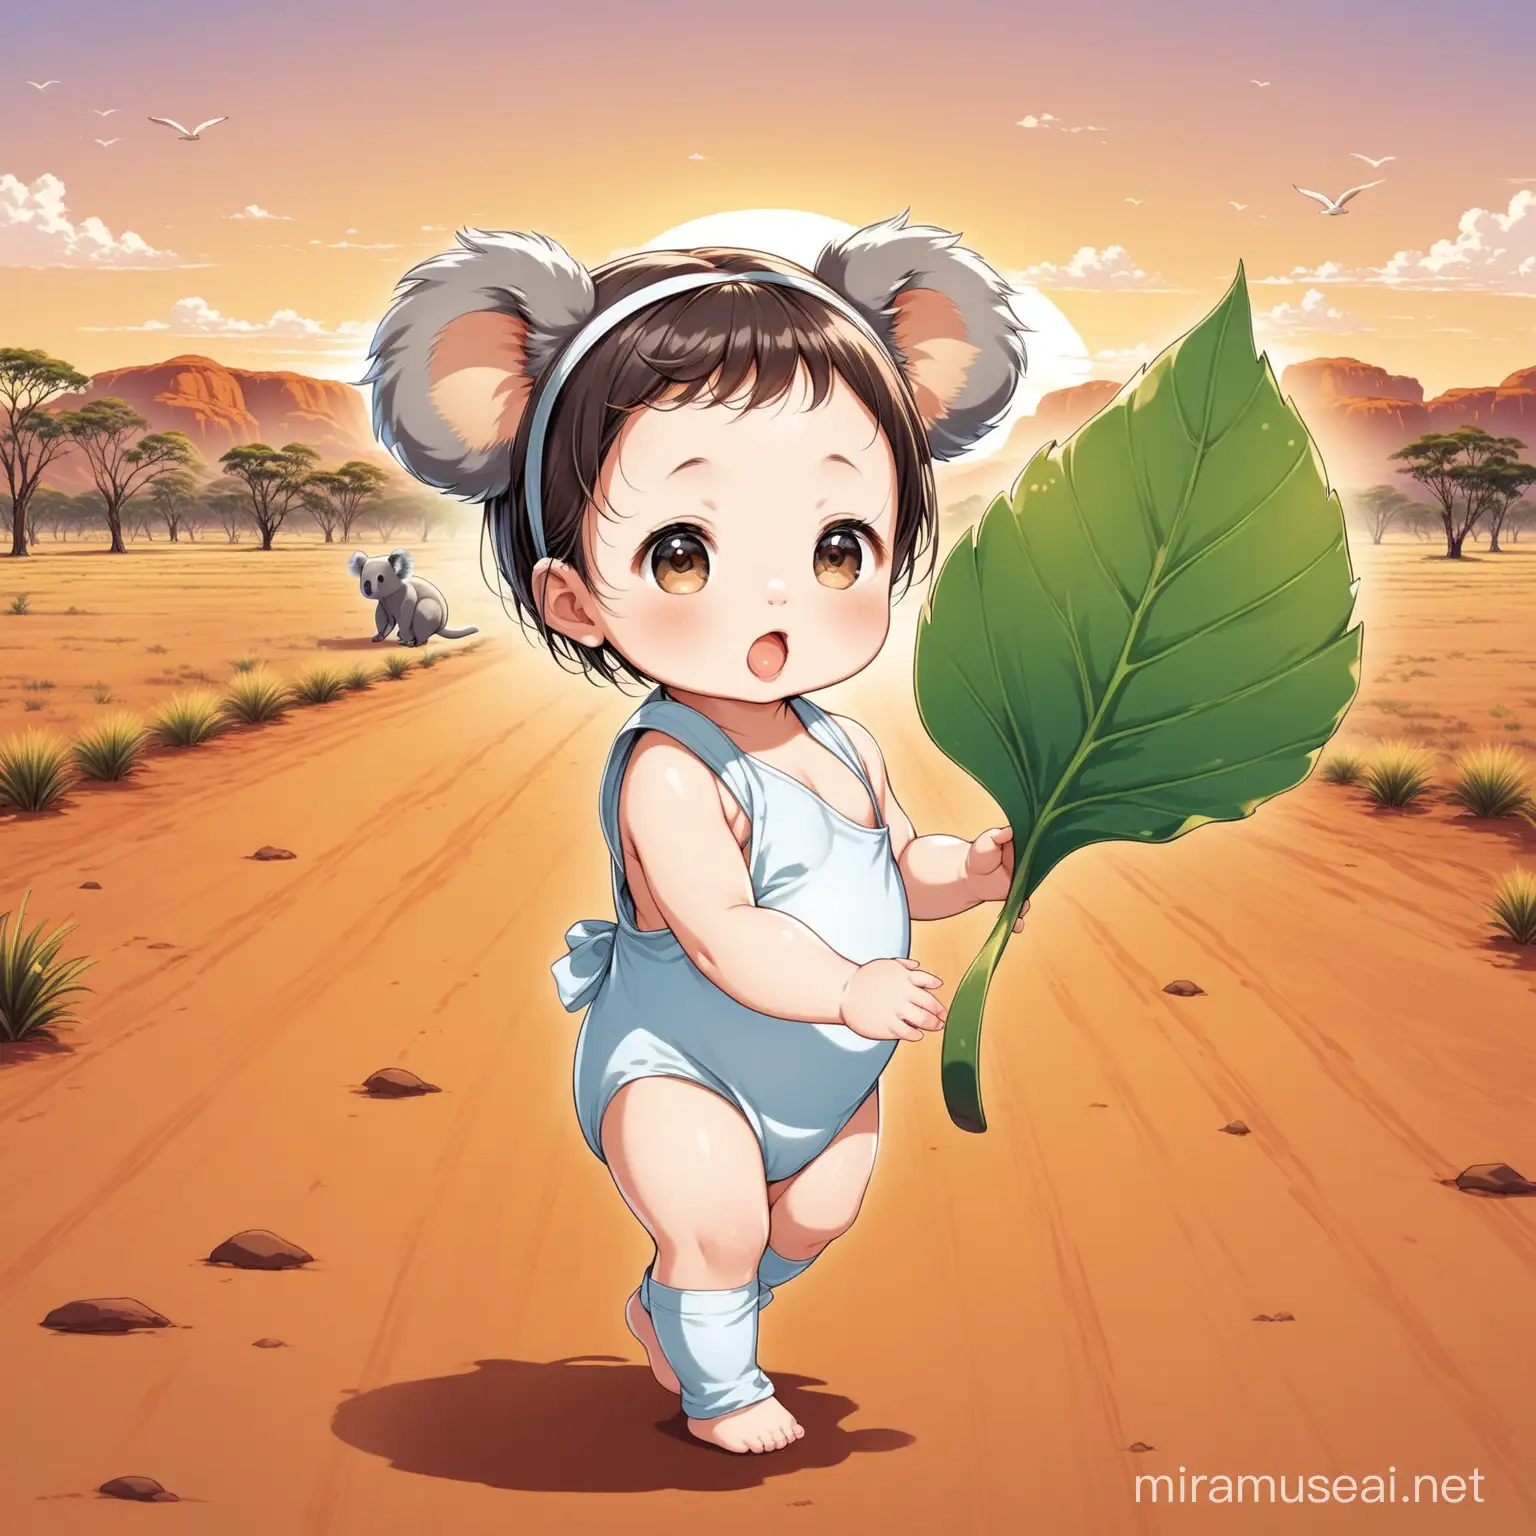 a japanese baby going to an adventure in australia, please make her walking around, add animals like kangaroo and koalas . please zoom out the image so we can see the australian outback background. the baby is holding a big leaf on her hand